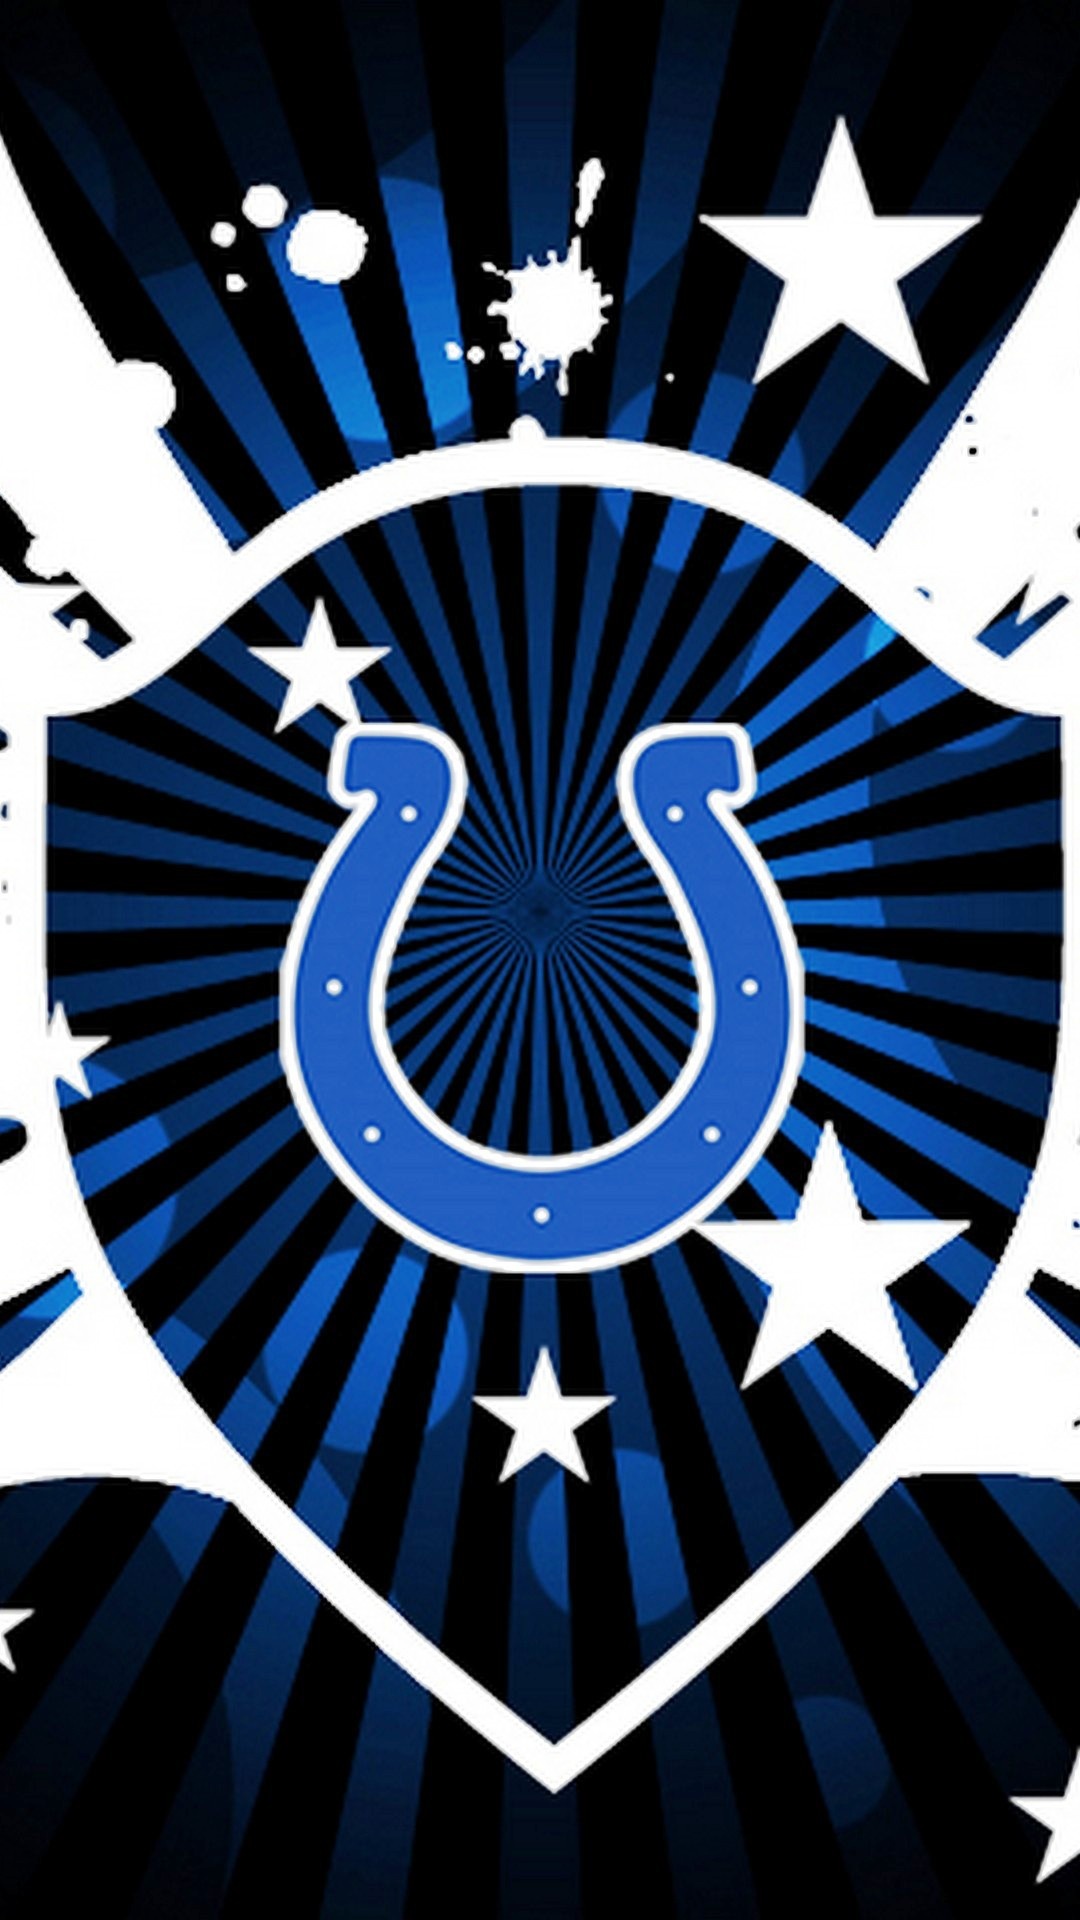 Indianapolis Colts, NFL pride, Team spirit, Apple iPhone, 1080x1920 Full HD Handy